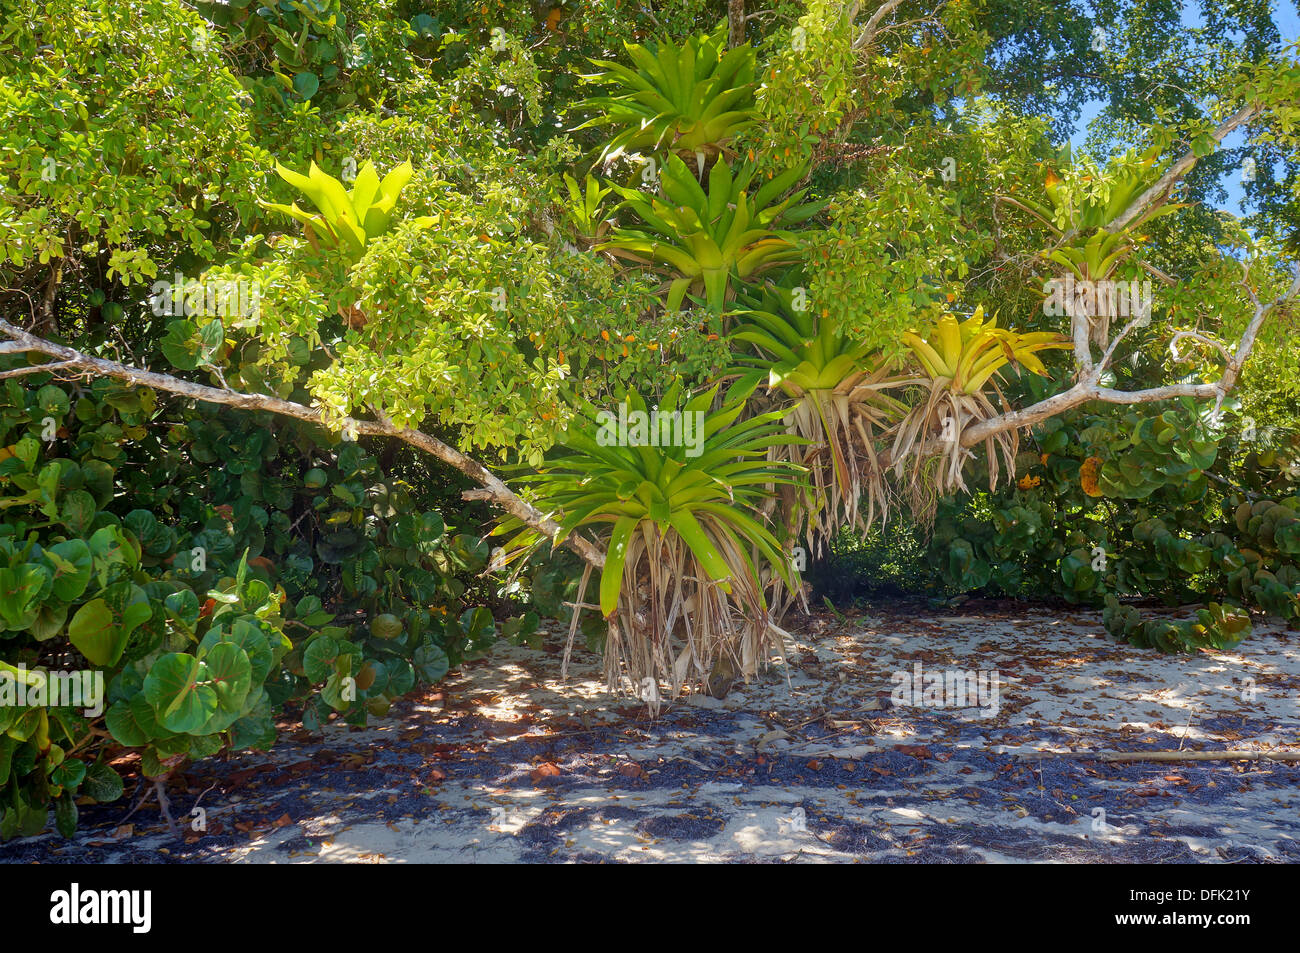 Lush epiphytes Bromeliads over tree in a Caribbean beach, Costa Rica Stock Photo